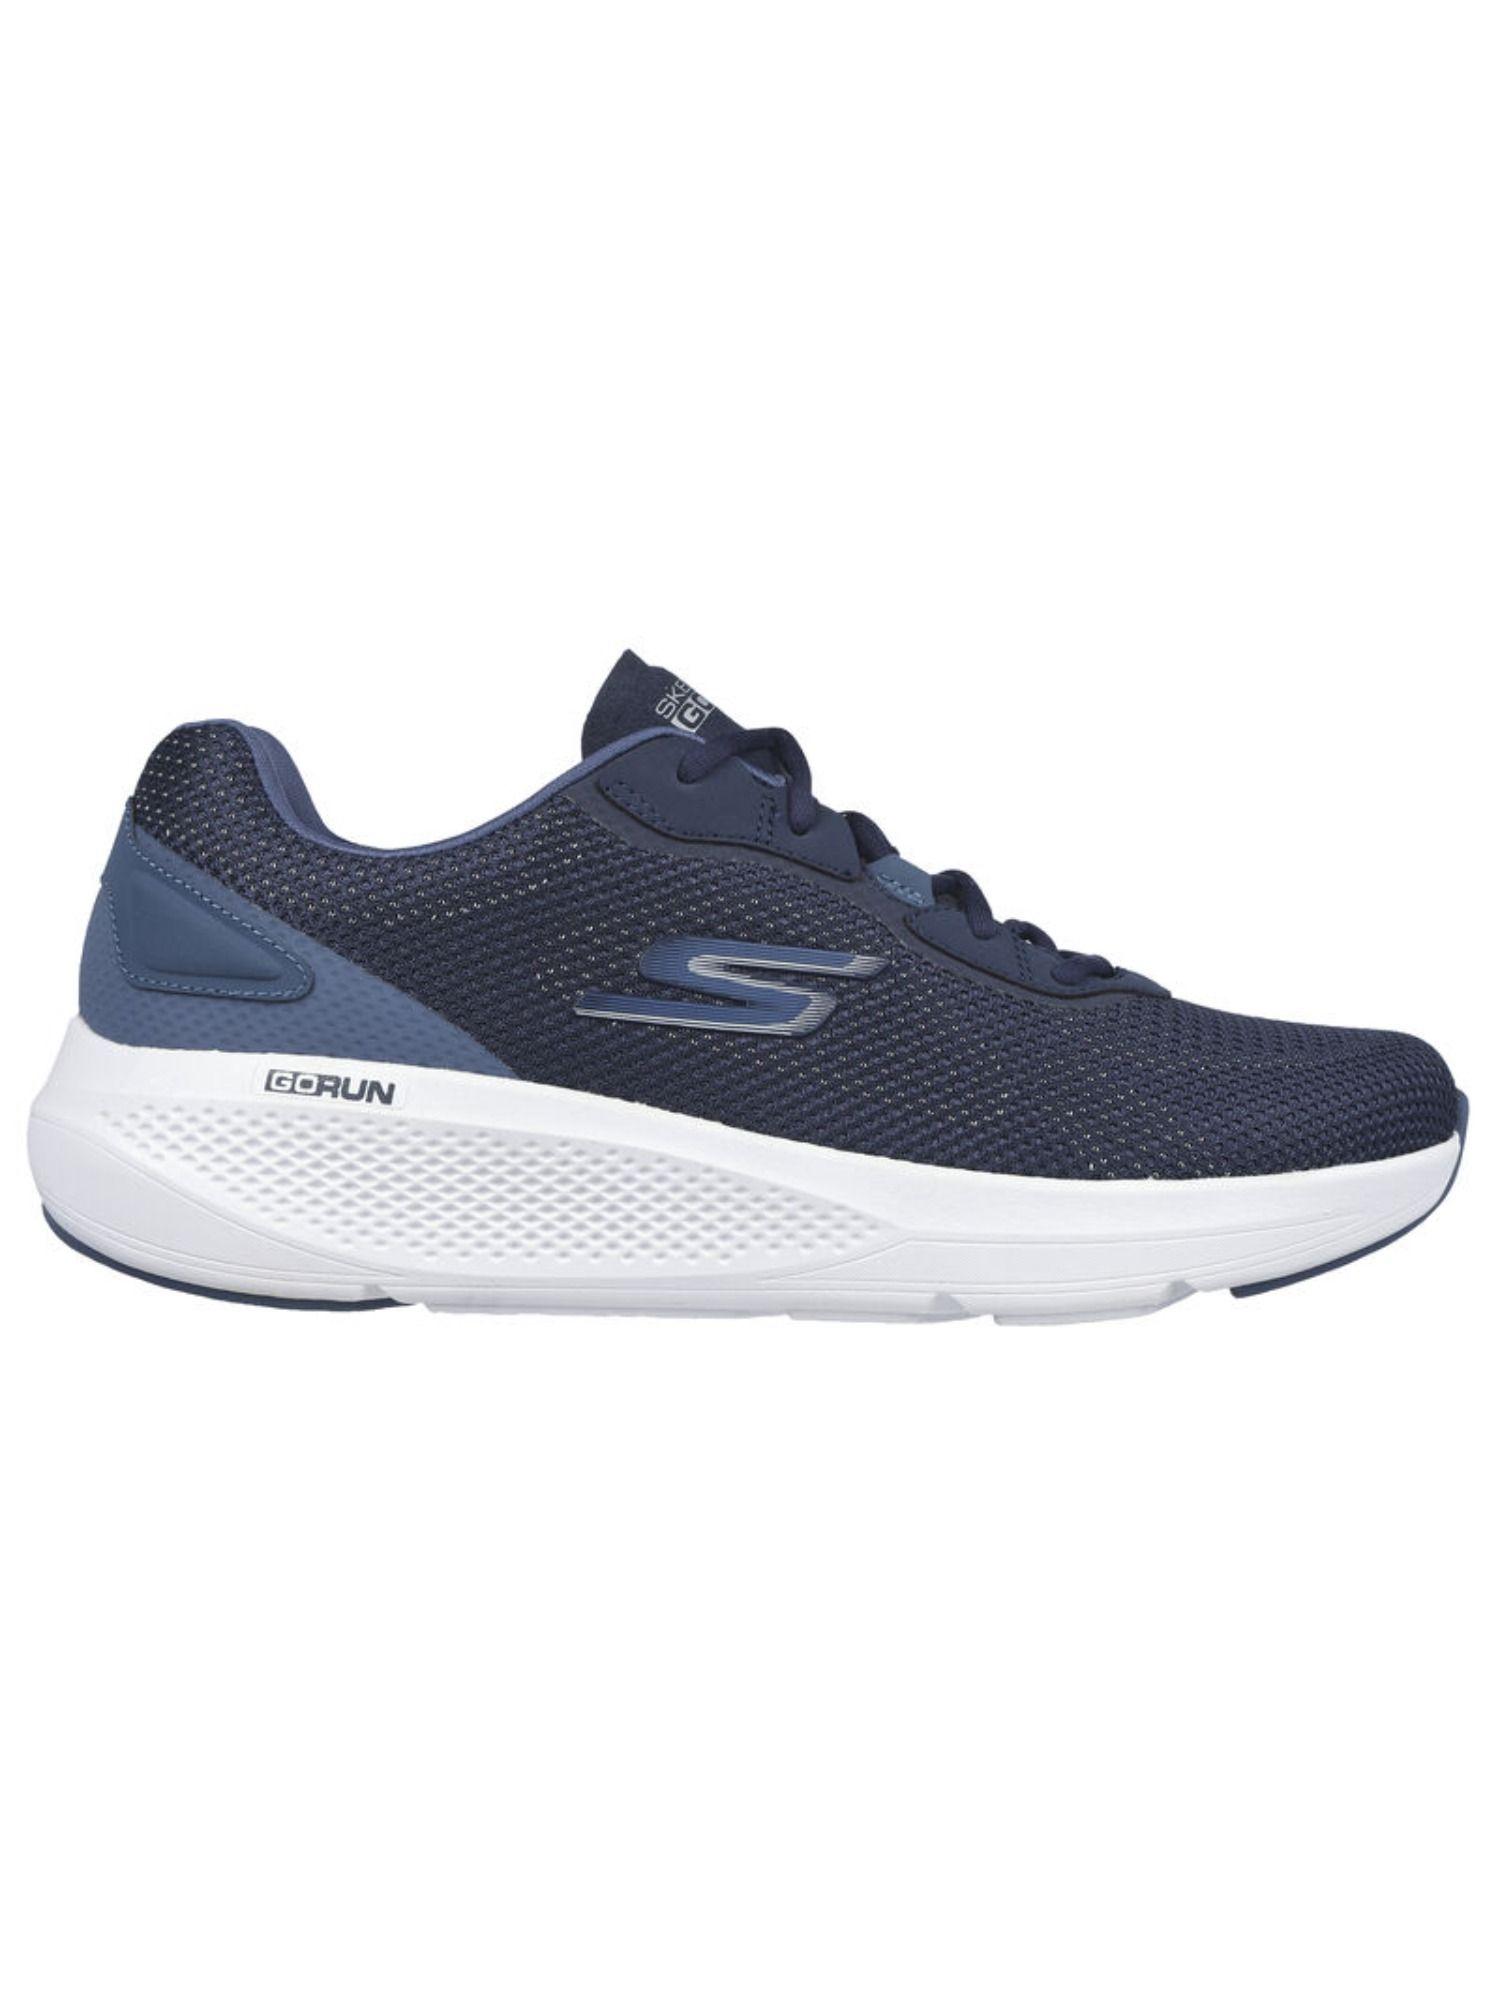 go-run-elevate-navy-blue-running-shoes